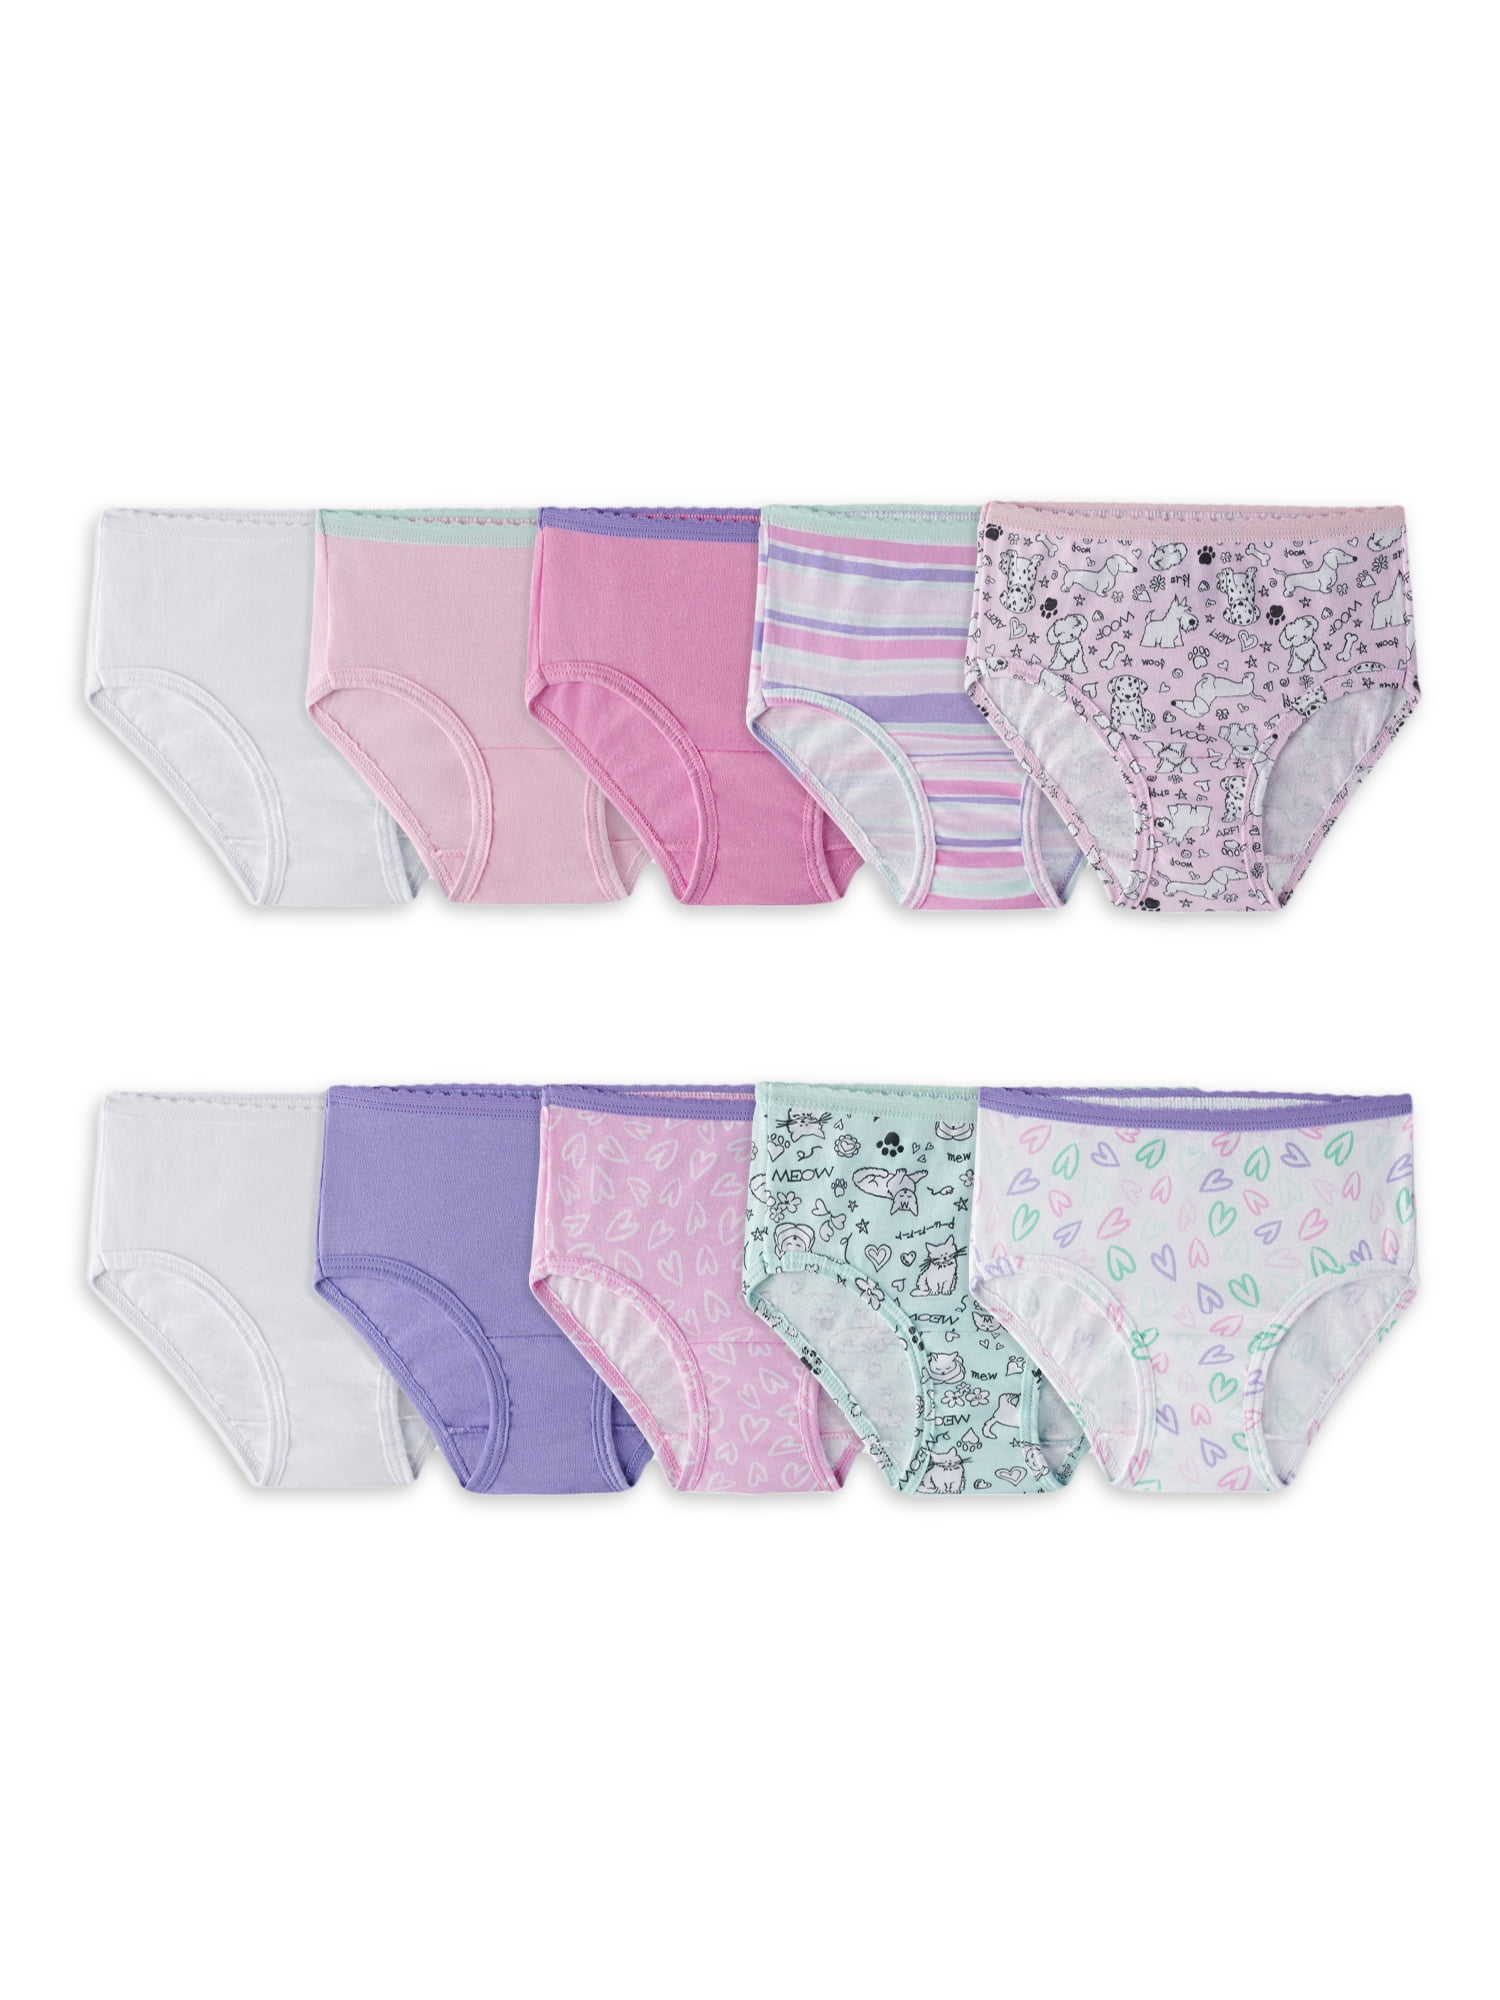 Fruit of the Loom Toddler Girl EverSoft Brief Underwear, 10 Pack, Sizes 2T-5T - Walmart.com